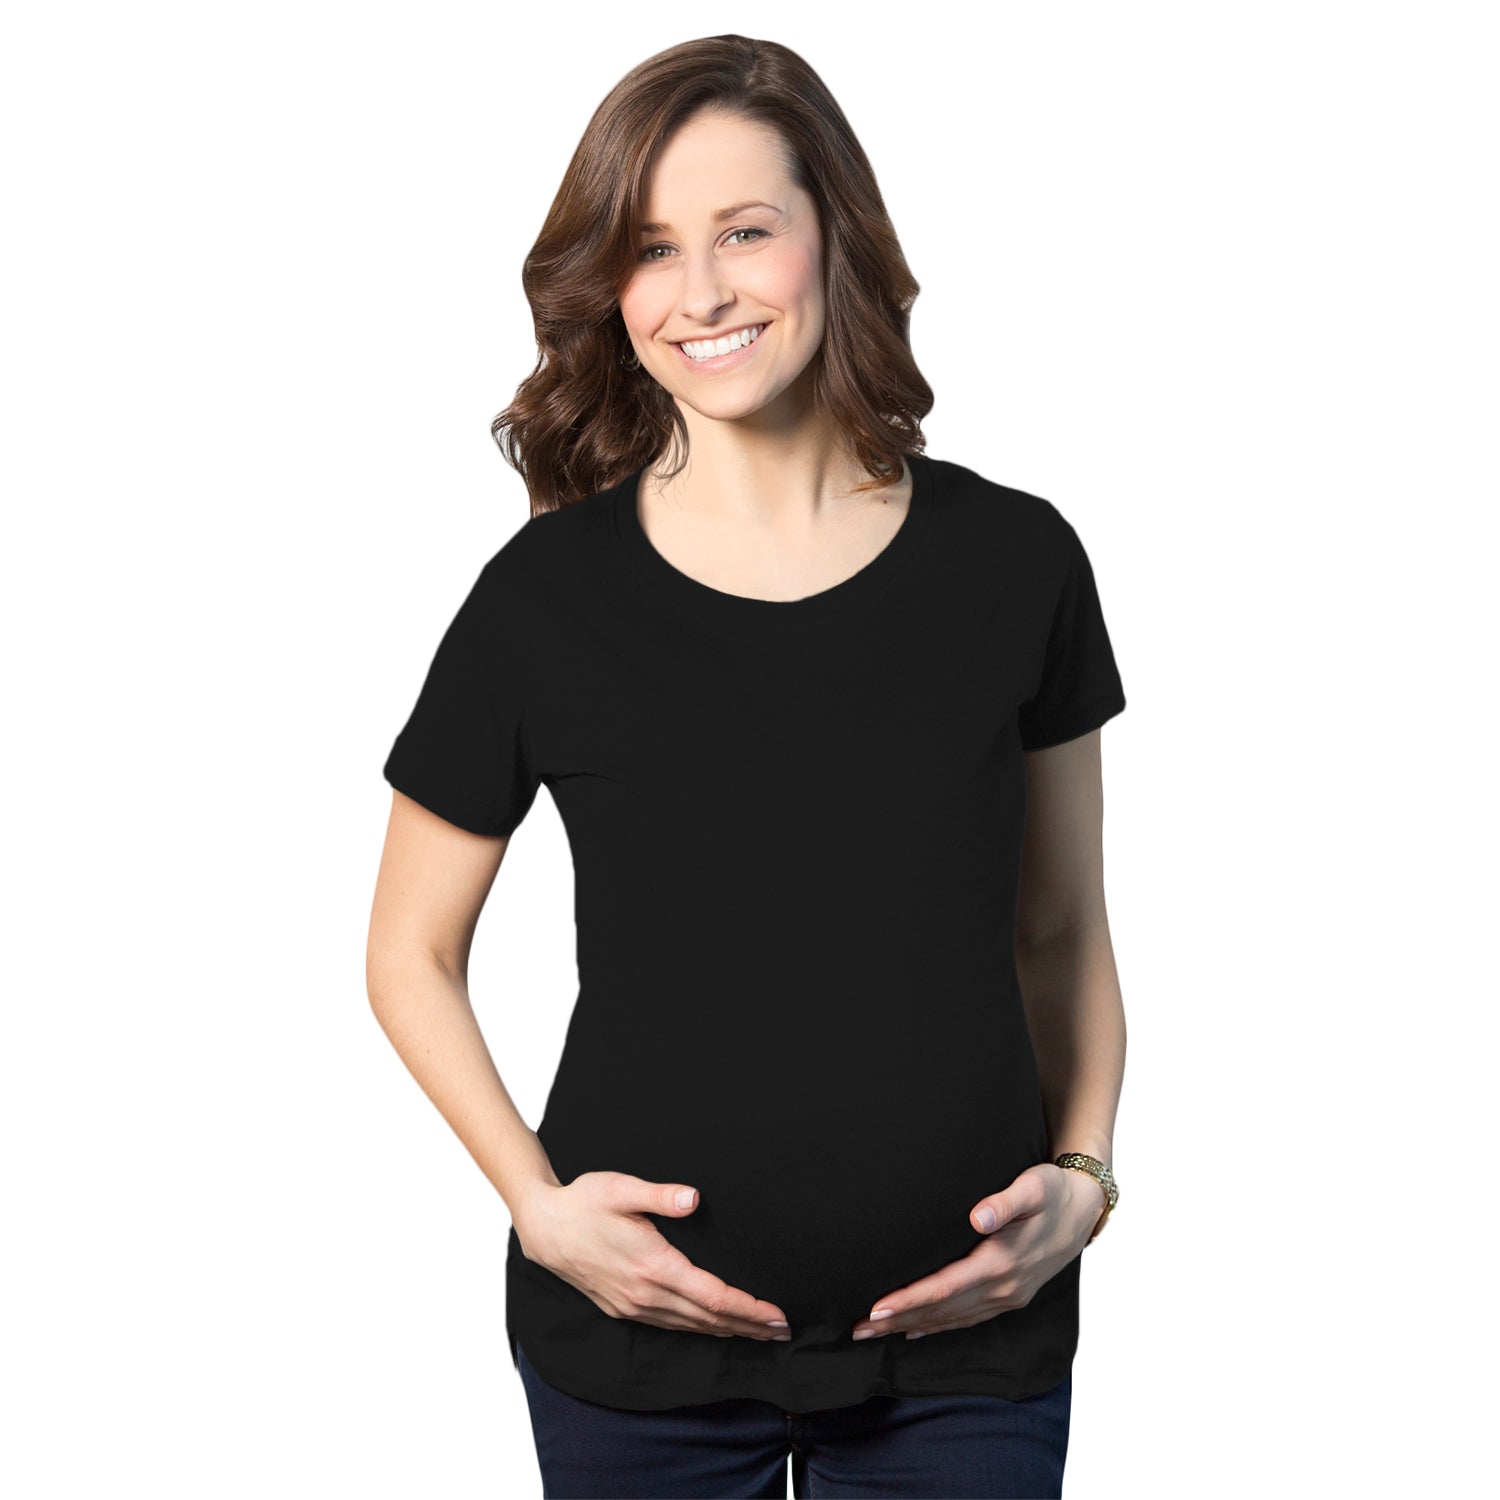 Funny 3 Pack Blank Maternity T Shirt Nerdy Tee